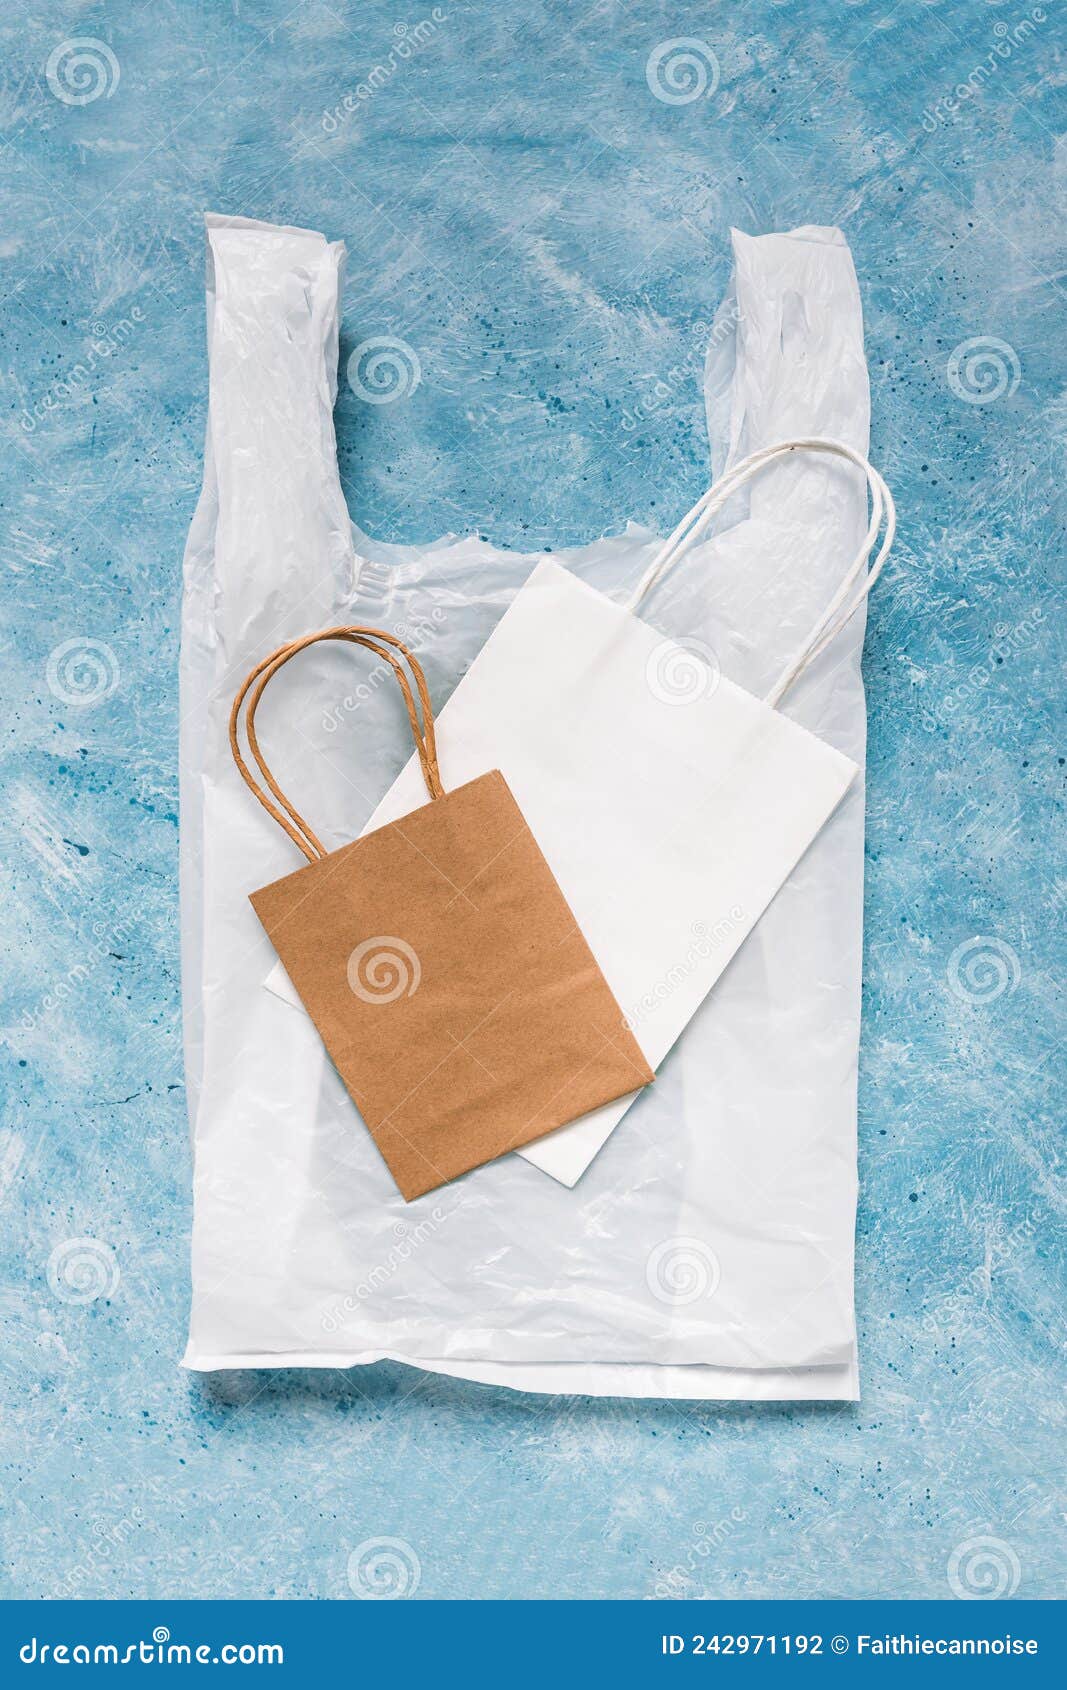 Single Use Plastic Bag Next To Paper Ones, Plastic Pollution and ...